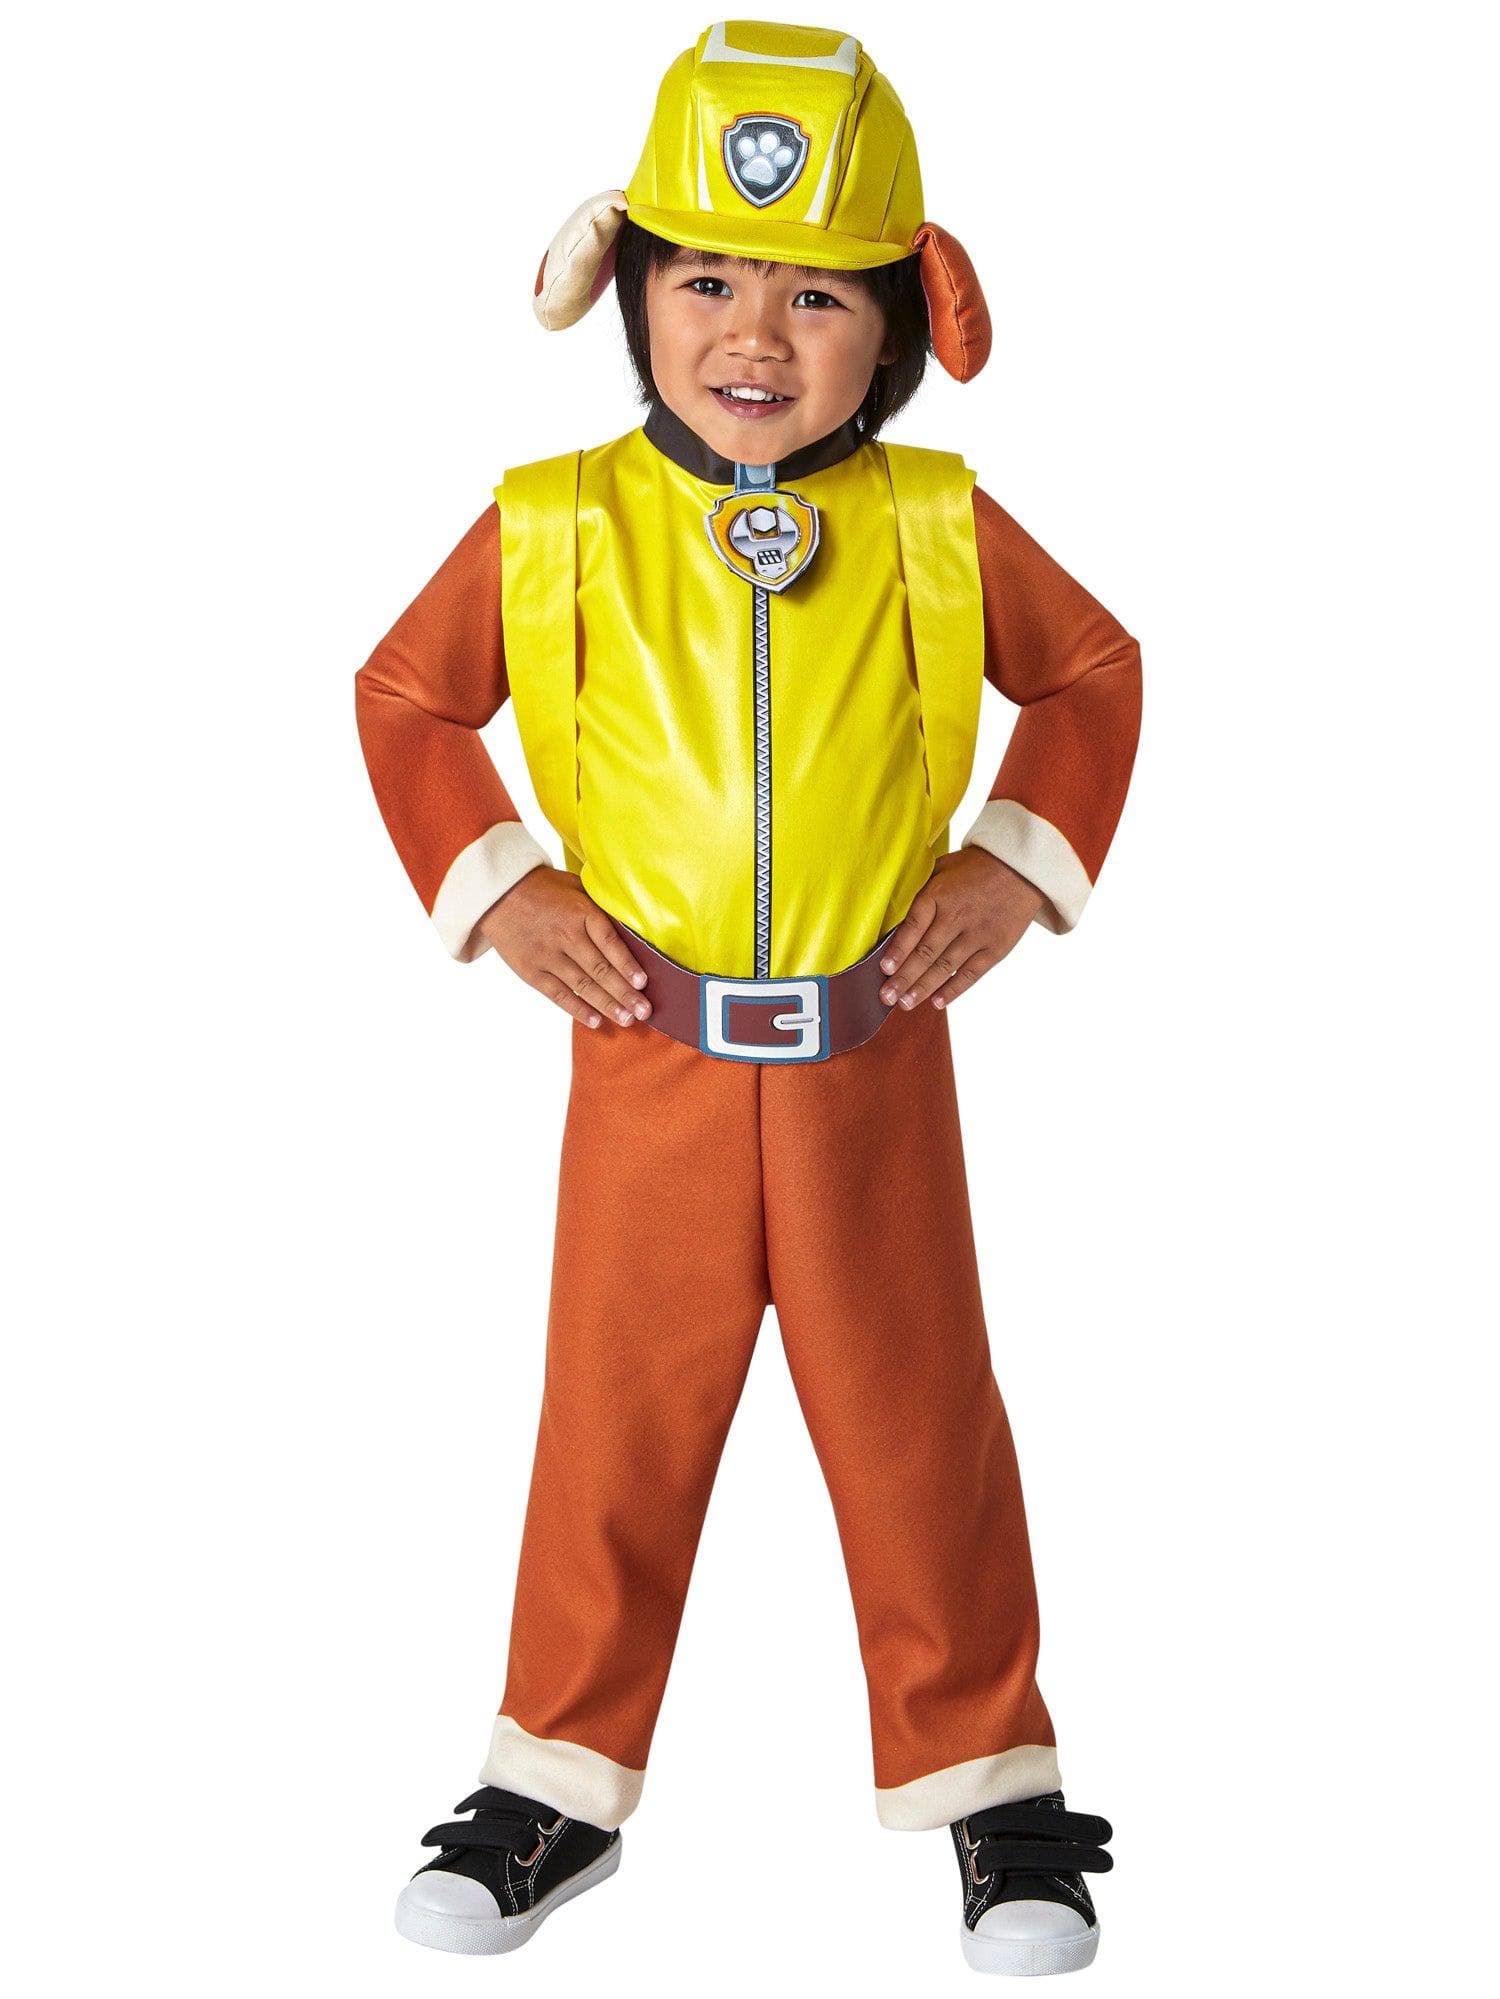 Paw Patrol Rubble Costume for Toddlers - Deluxe - costumes.com